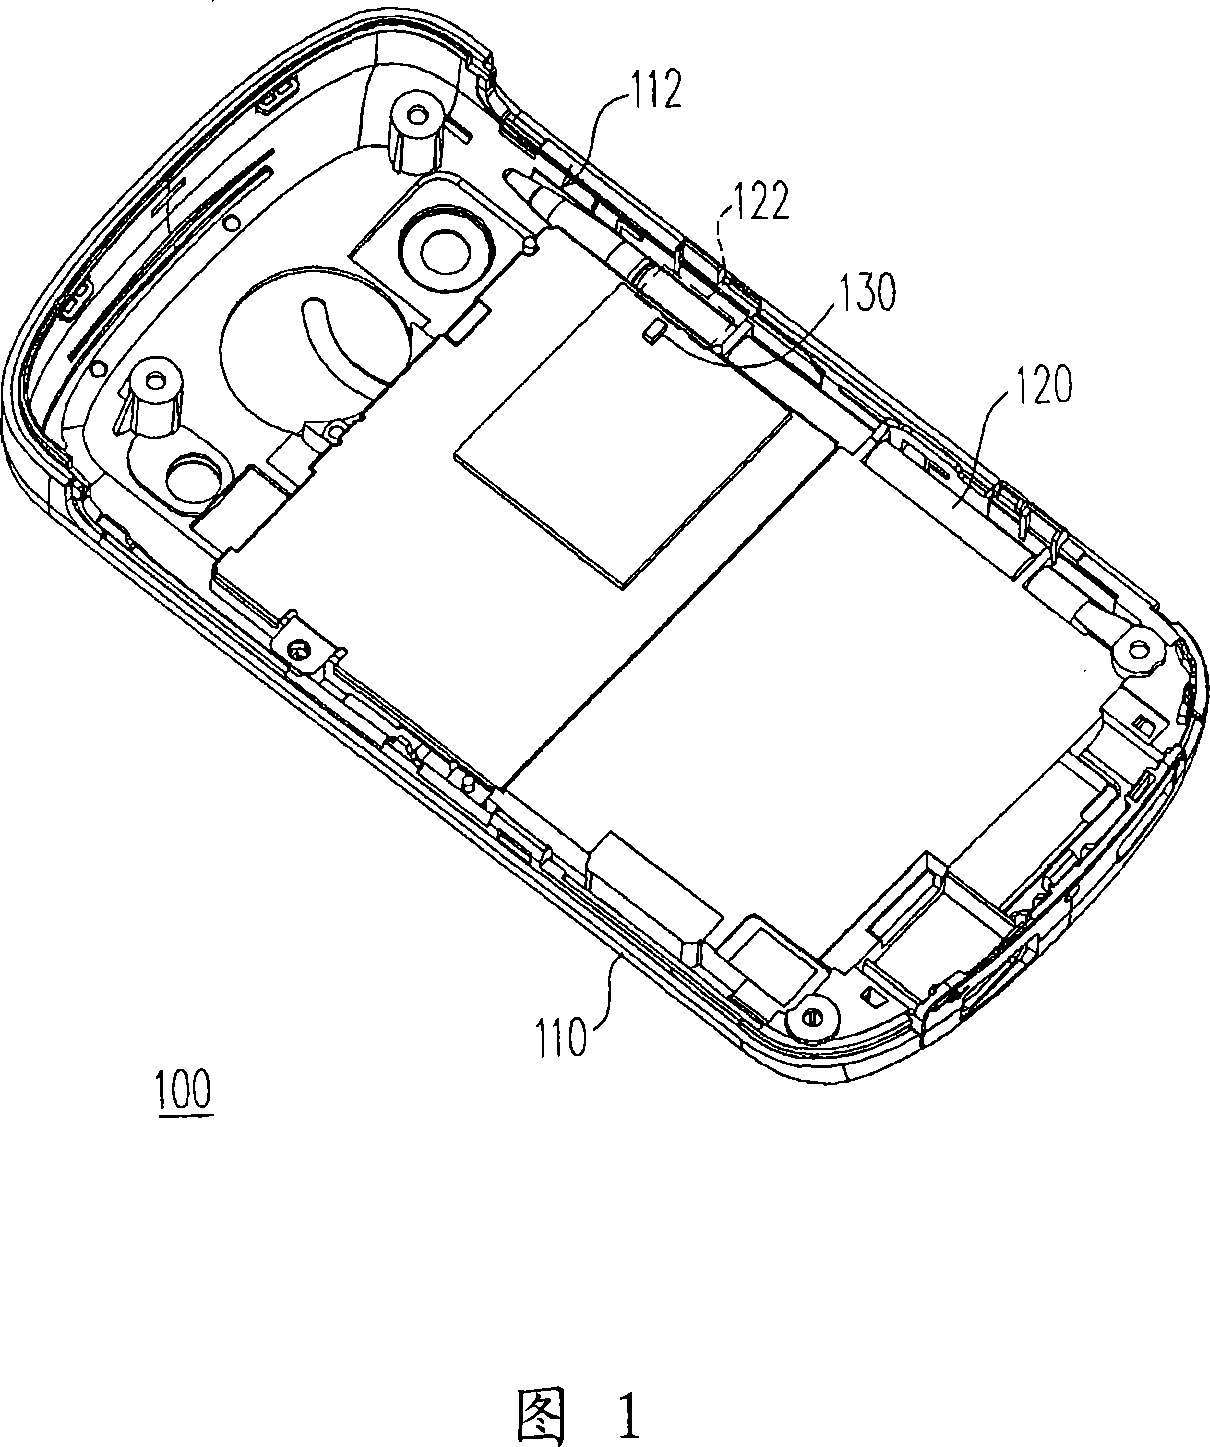 Hand-hold electronic device